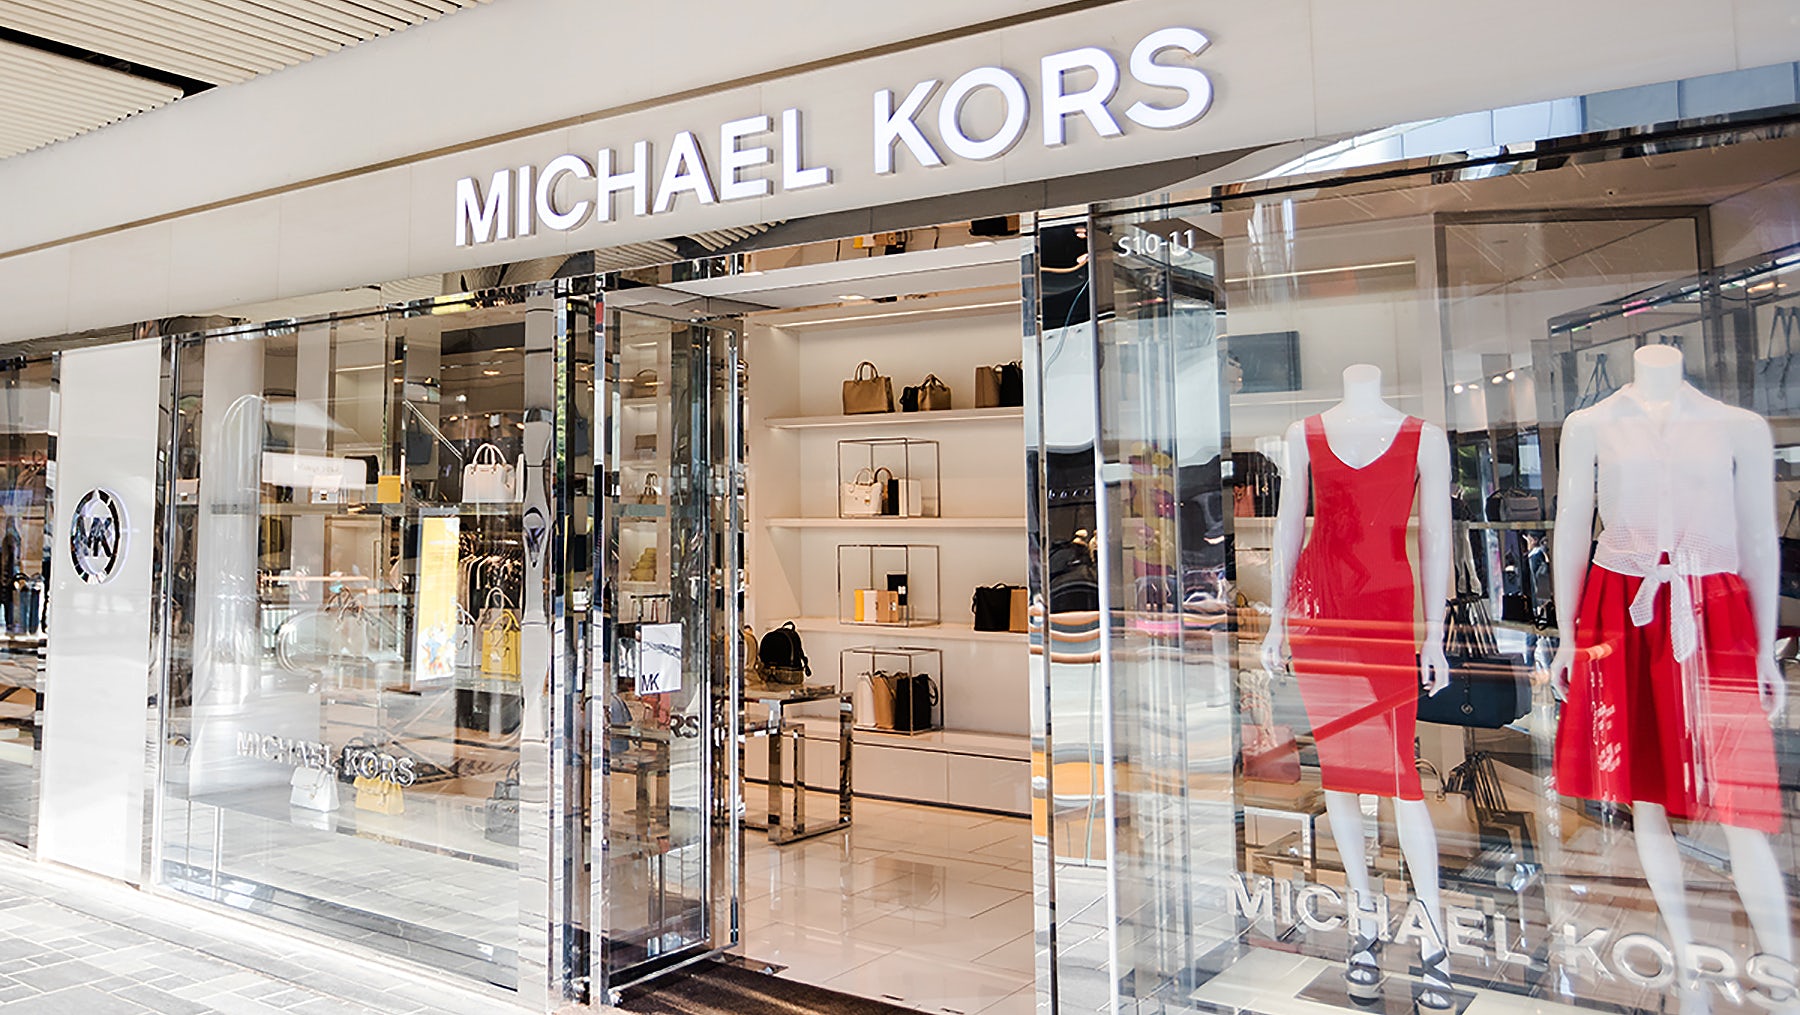 Michael Kors Hopes to Win Customers with | BoF